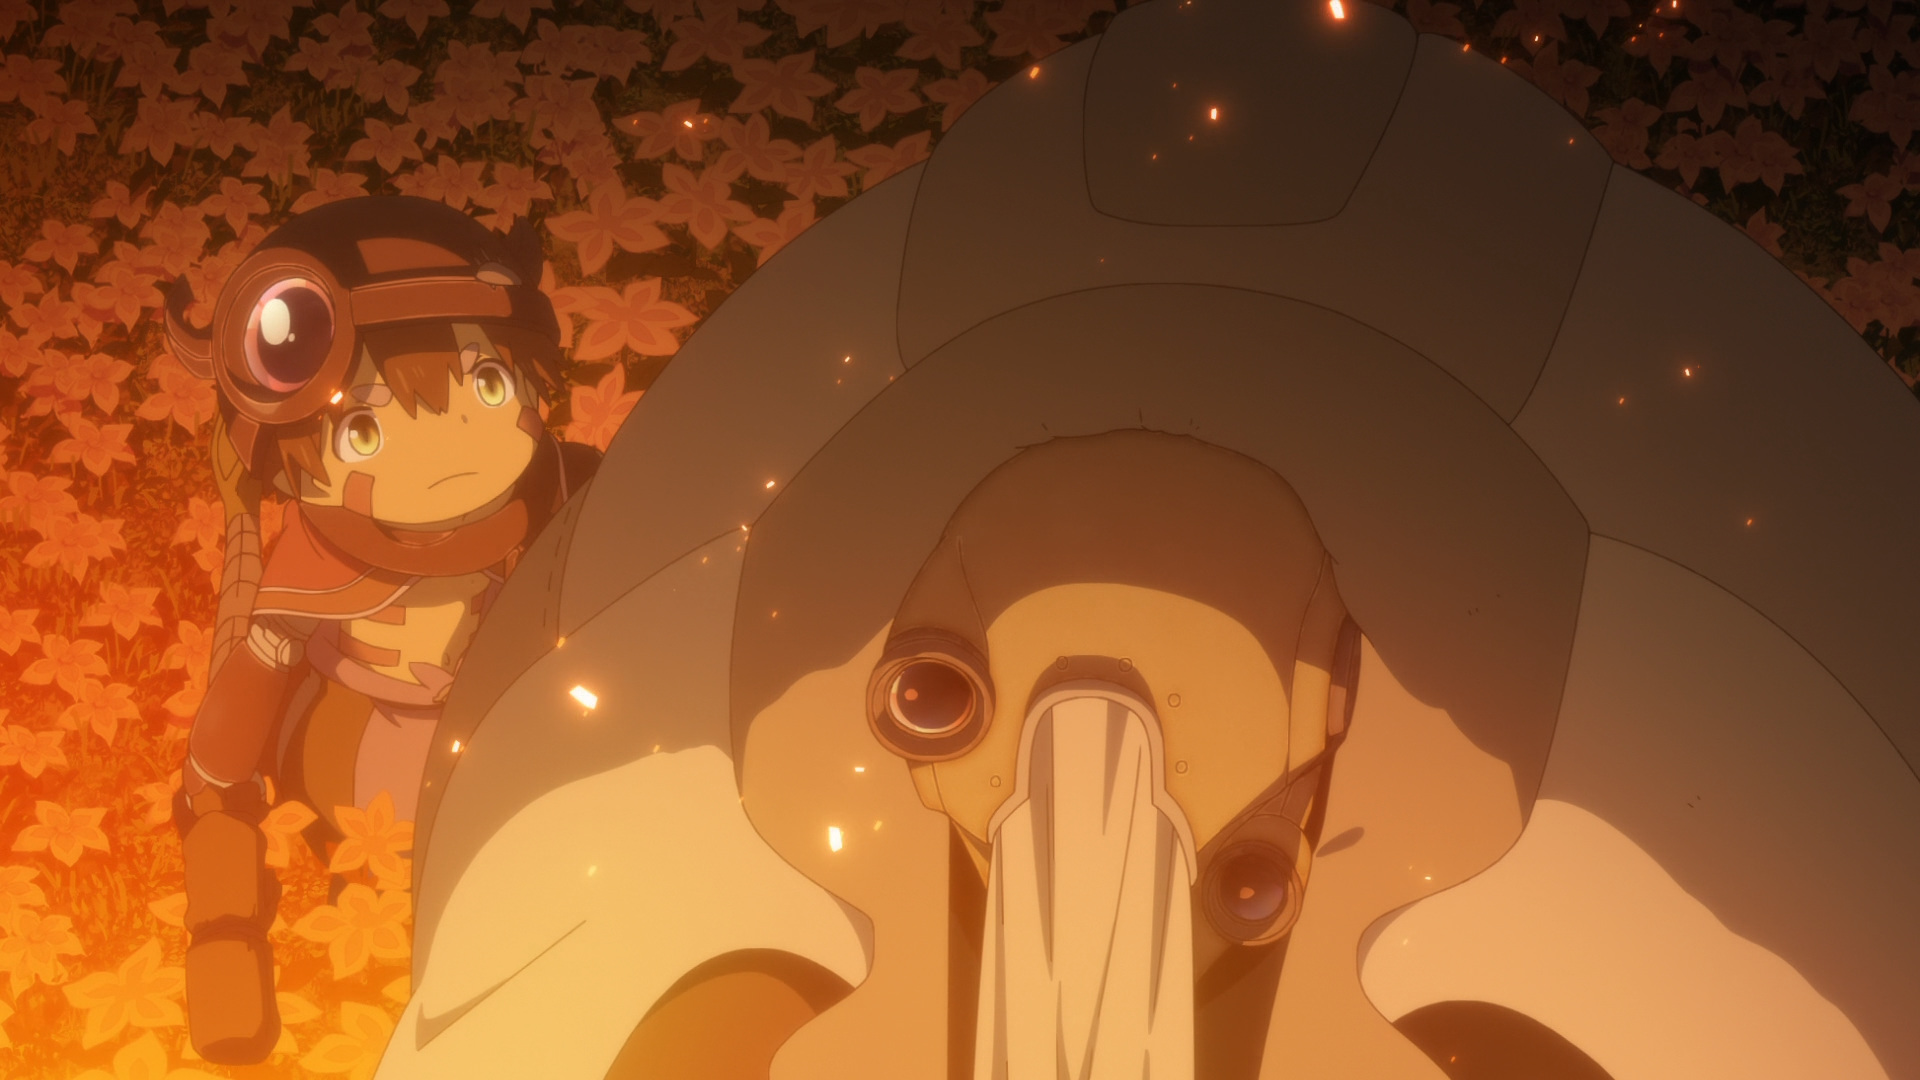 Made in Abyss: Dawn of the Deep Soul (Fukaki Tamashii no Reimei) – The  Review Heap